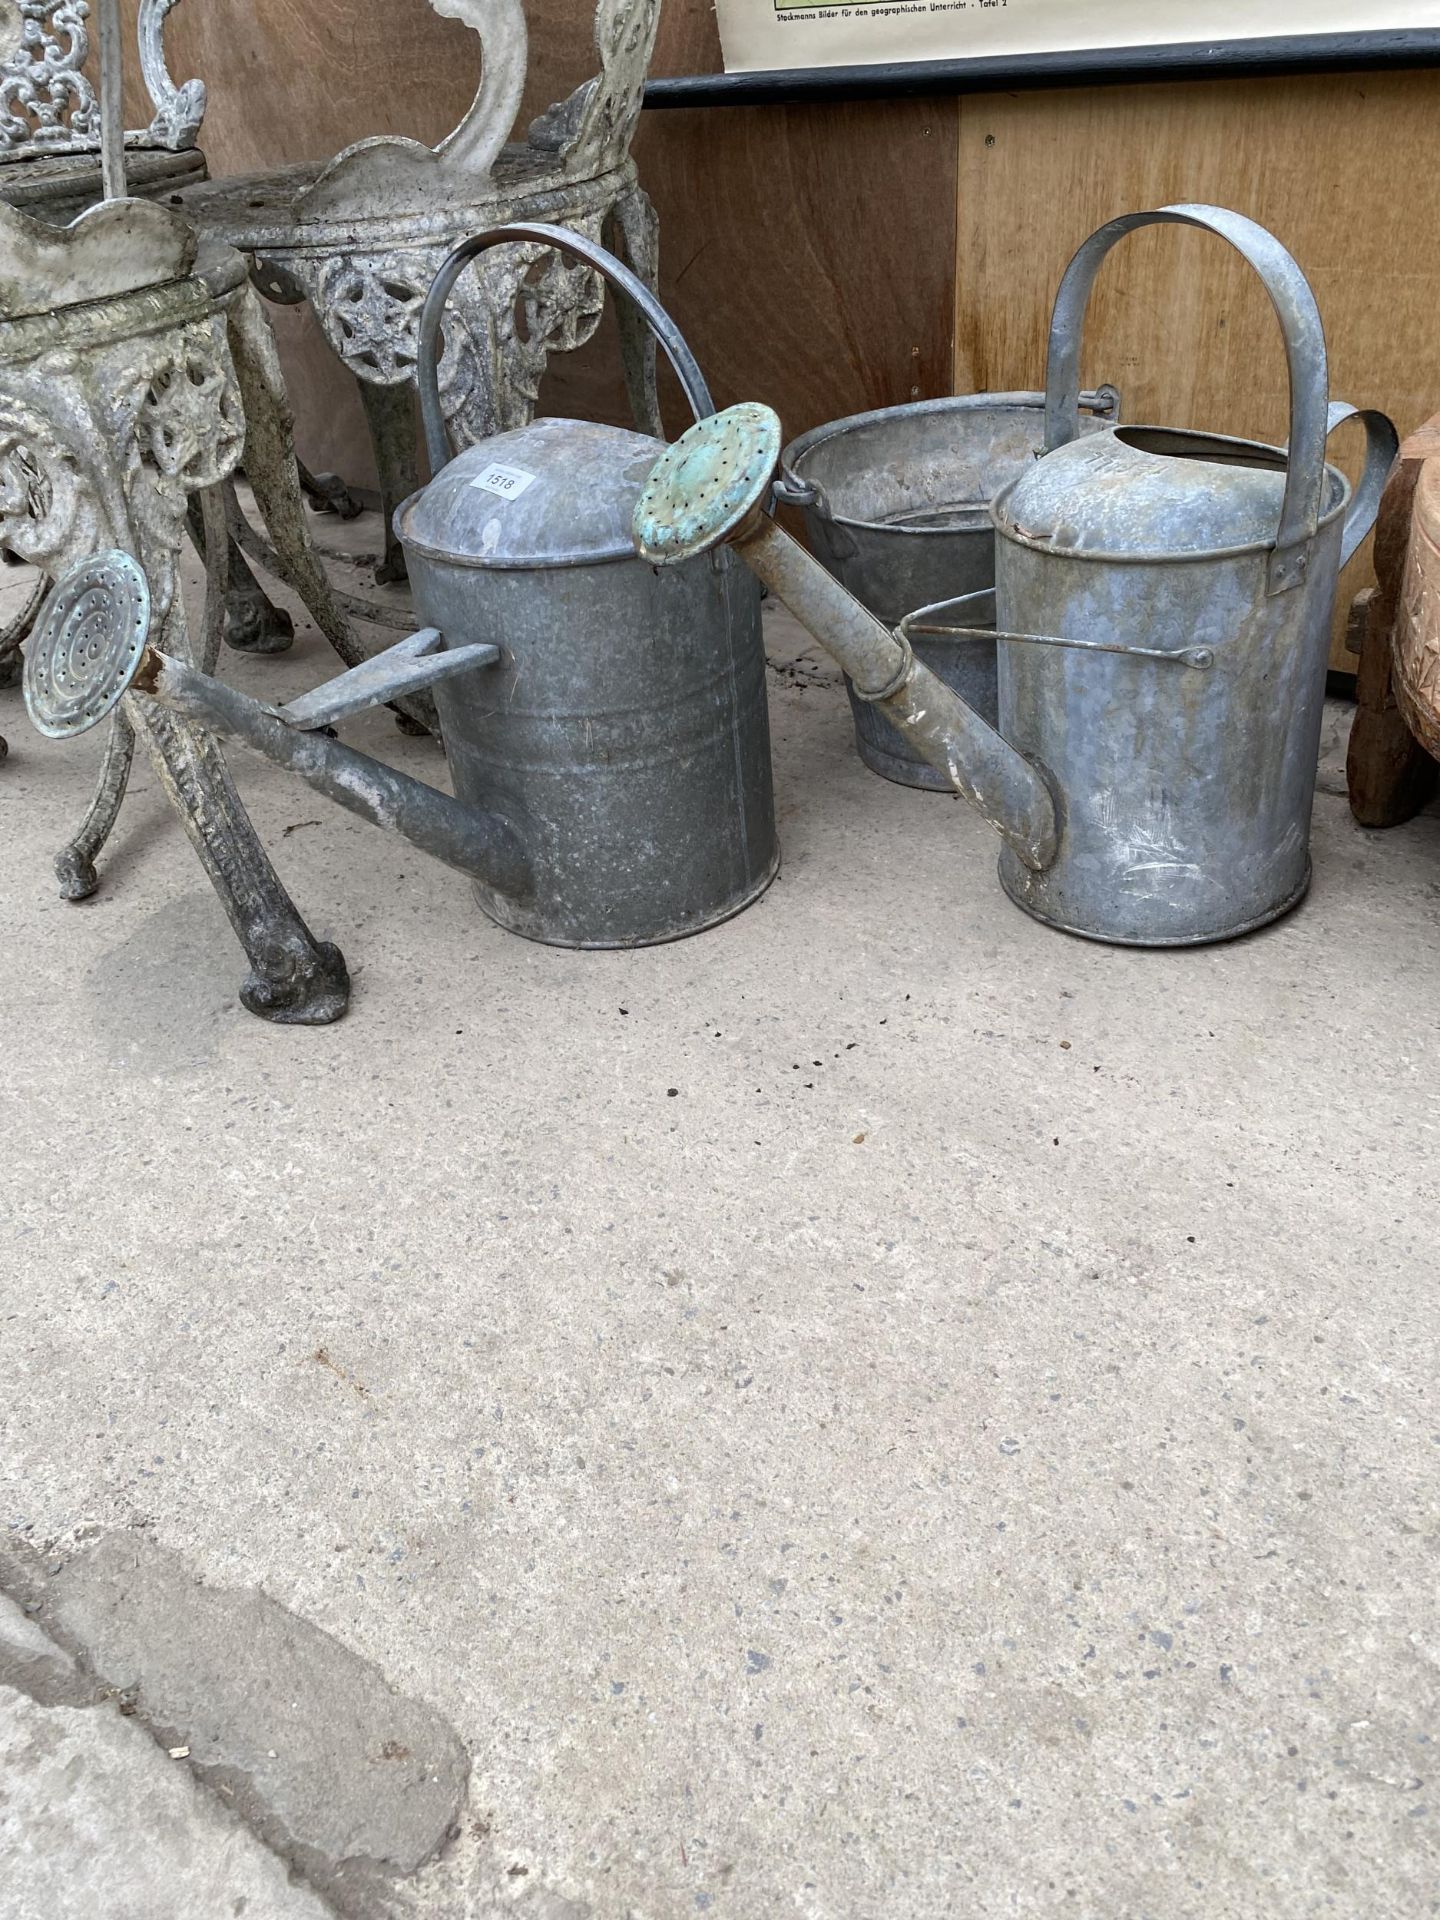 TWO VINTAGE GALVANISED WATERING CANS AND A GALVANISED BUCKET - Image 2 of 3